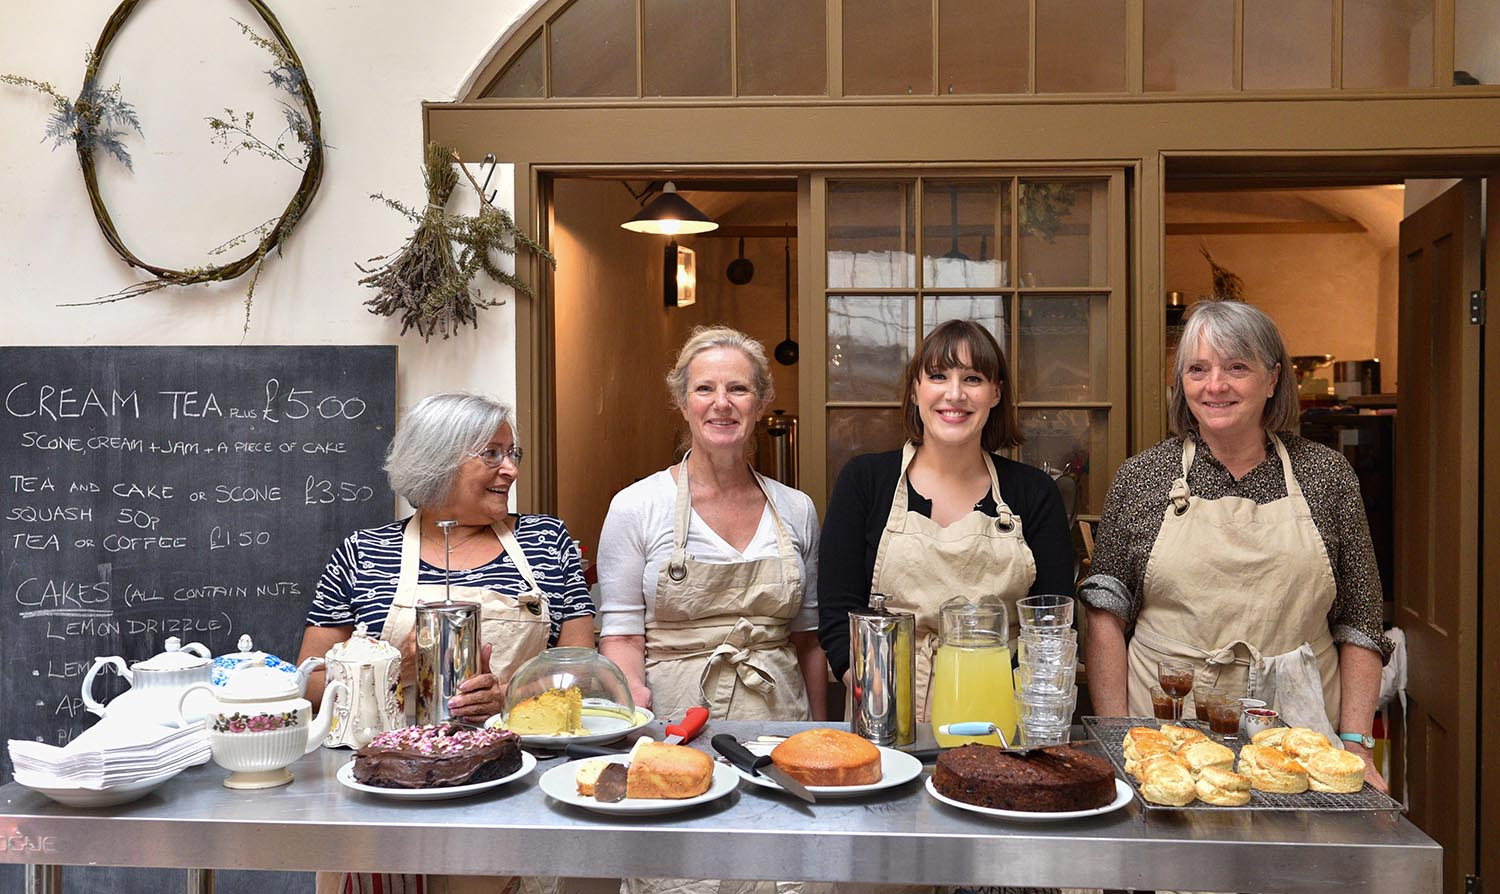 Photograph showing four volunteers serving from behind a counter laden with cakes and refreshments